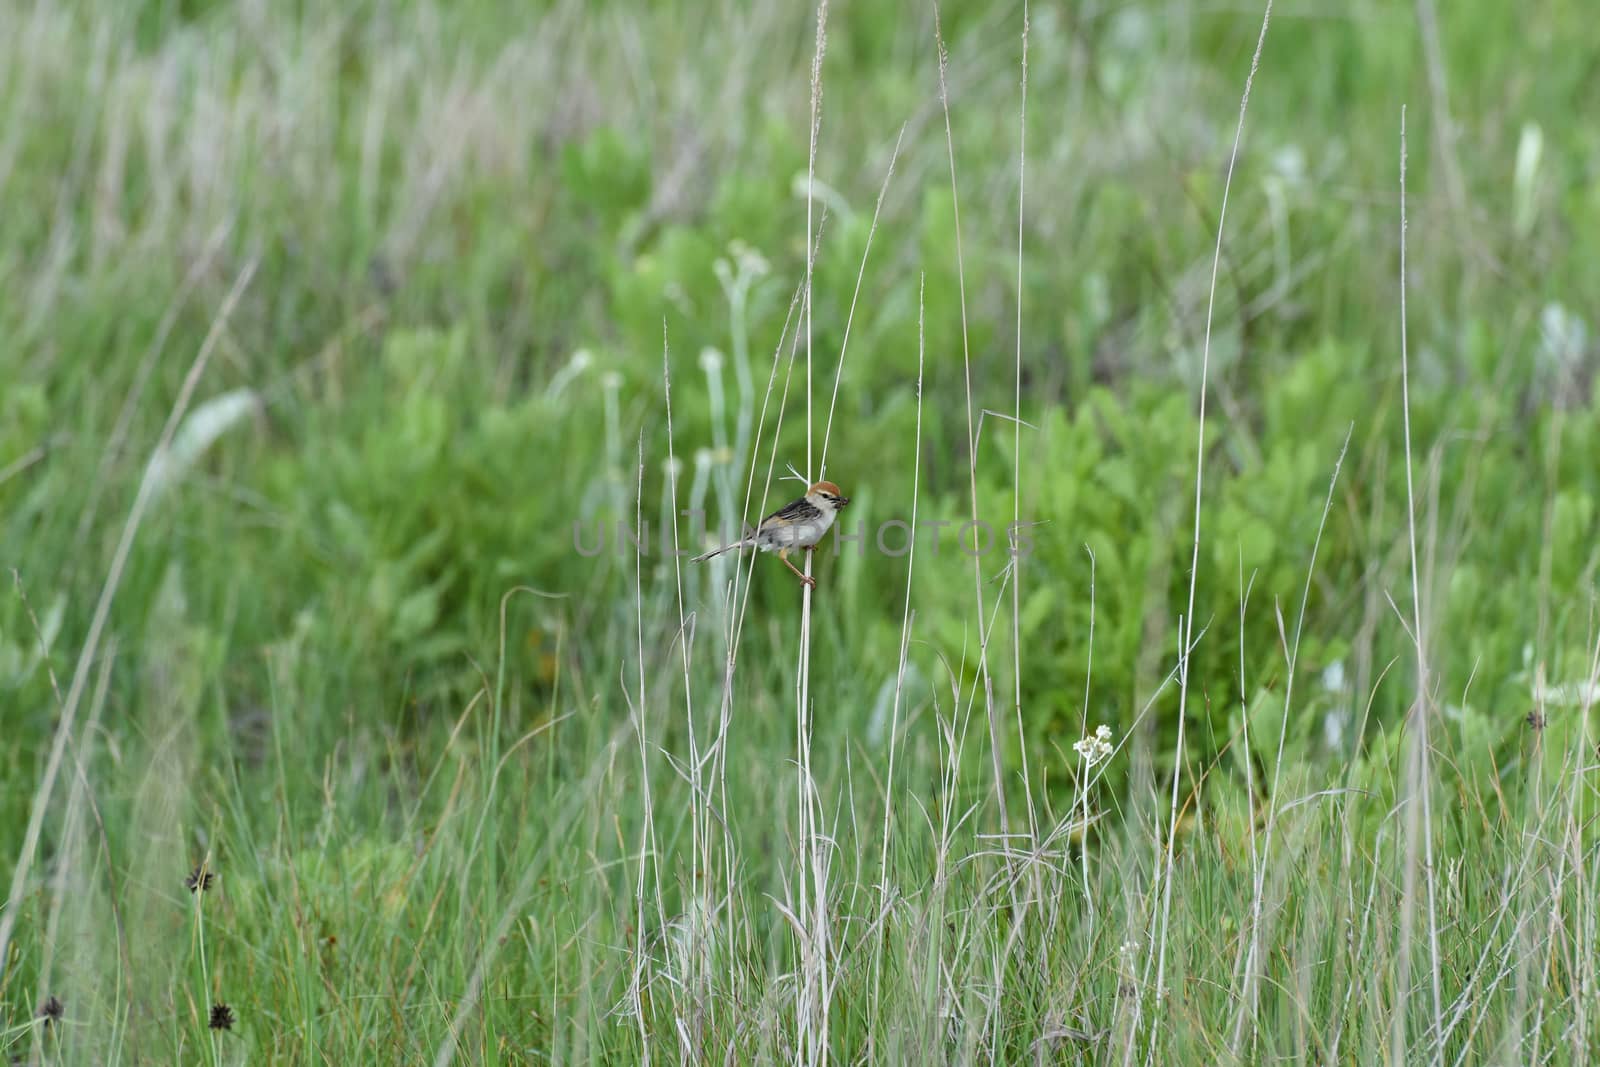 A levaillant's cisticola bird (Cisticola tinniens) with an insect caught in its beak on field grass near lake, Dullstroom, South Africa